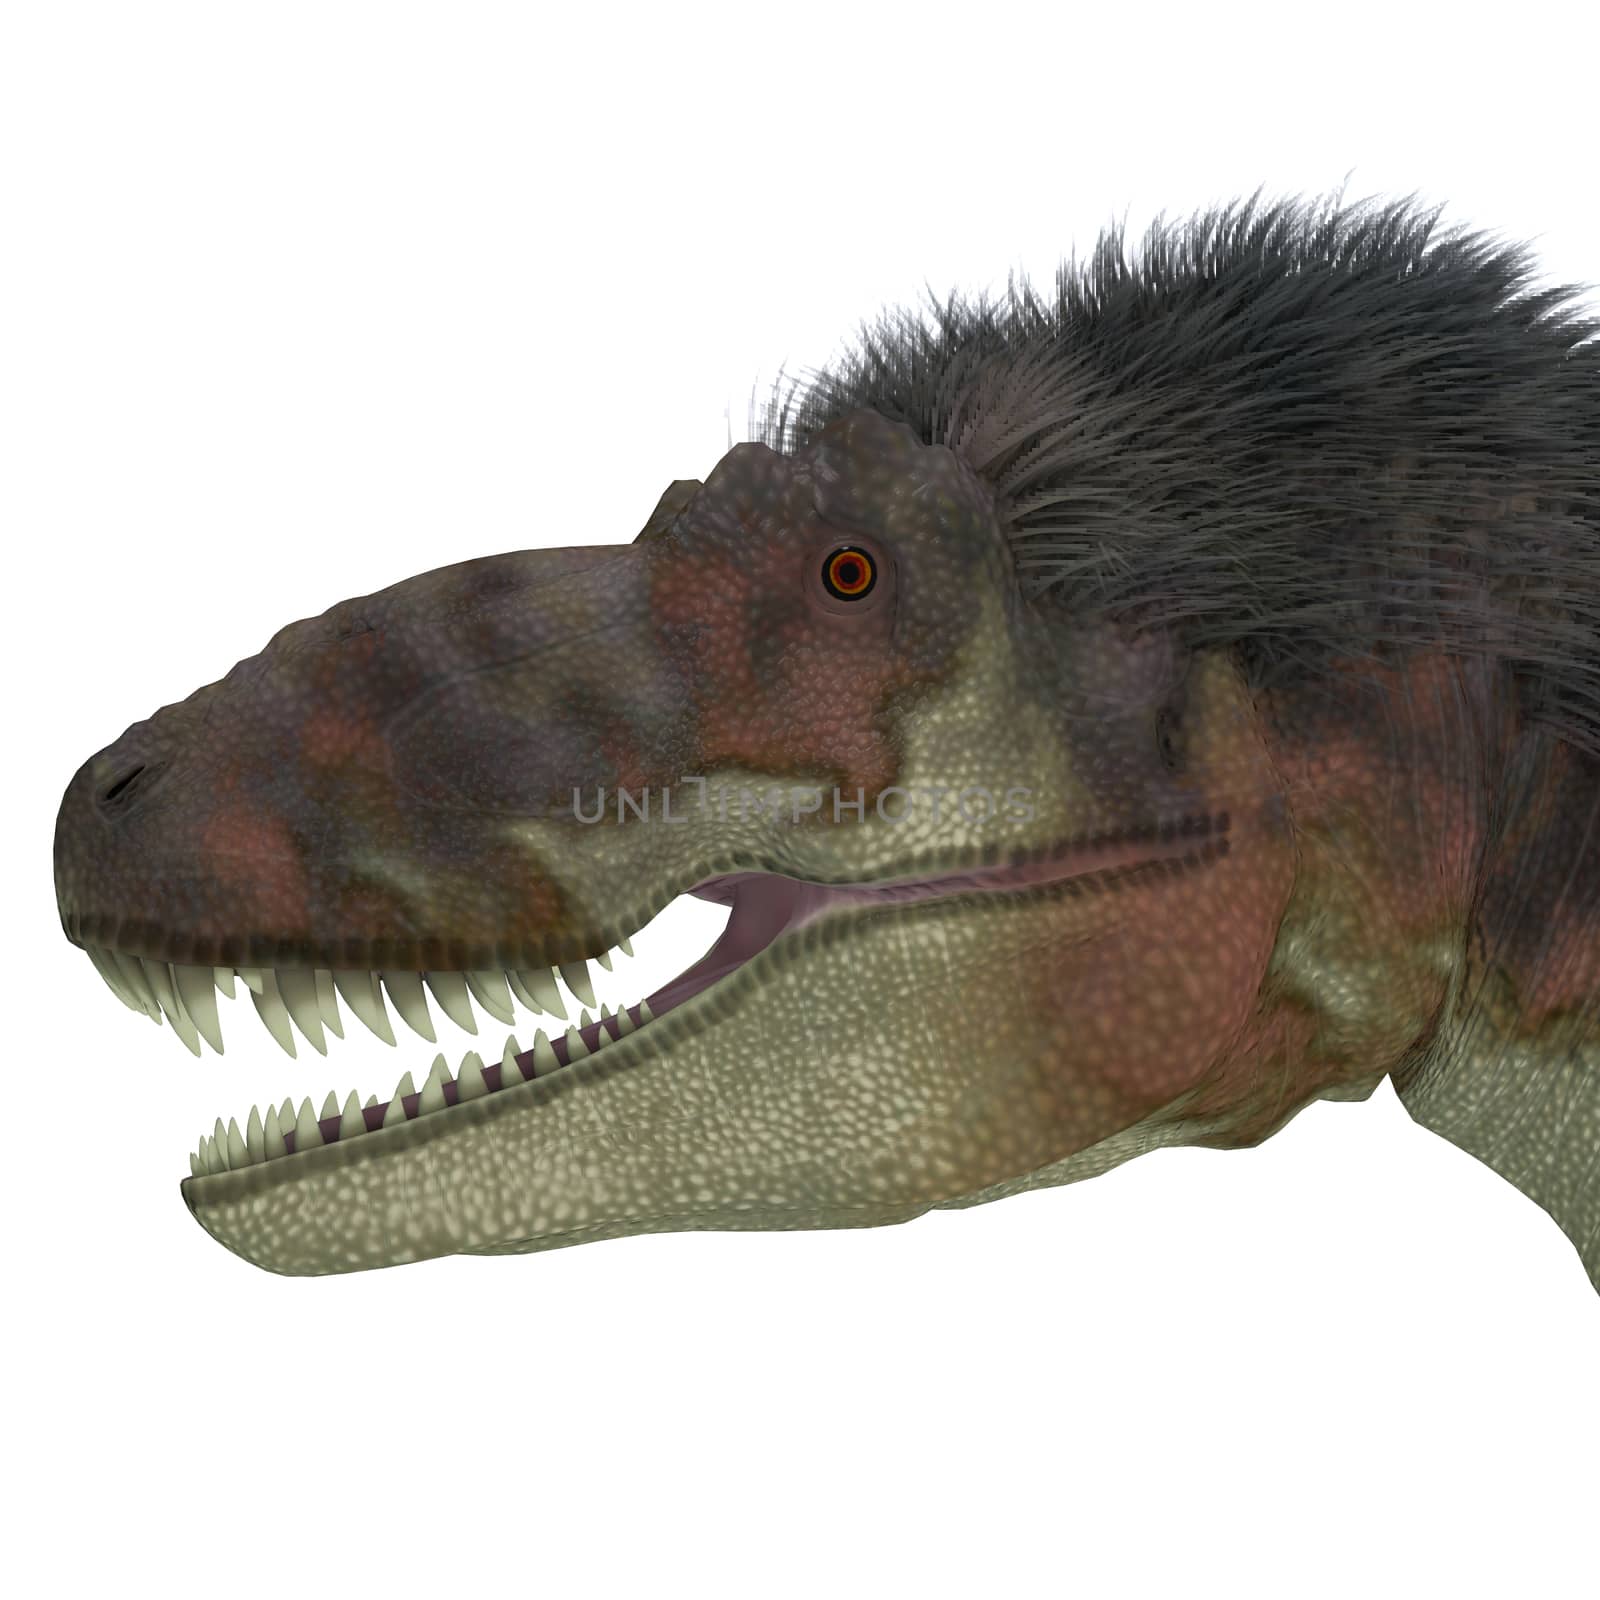 Daspletosaurus was a carnivorous theropod dinosaur that lived during the Cretaceous Period of North America. 